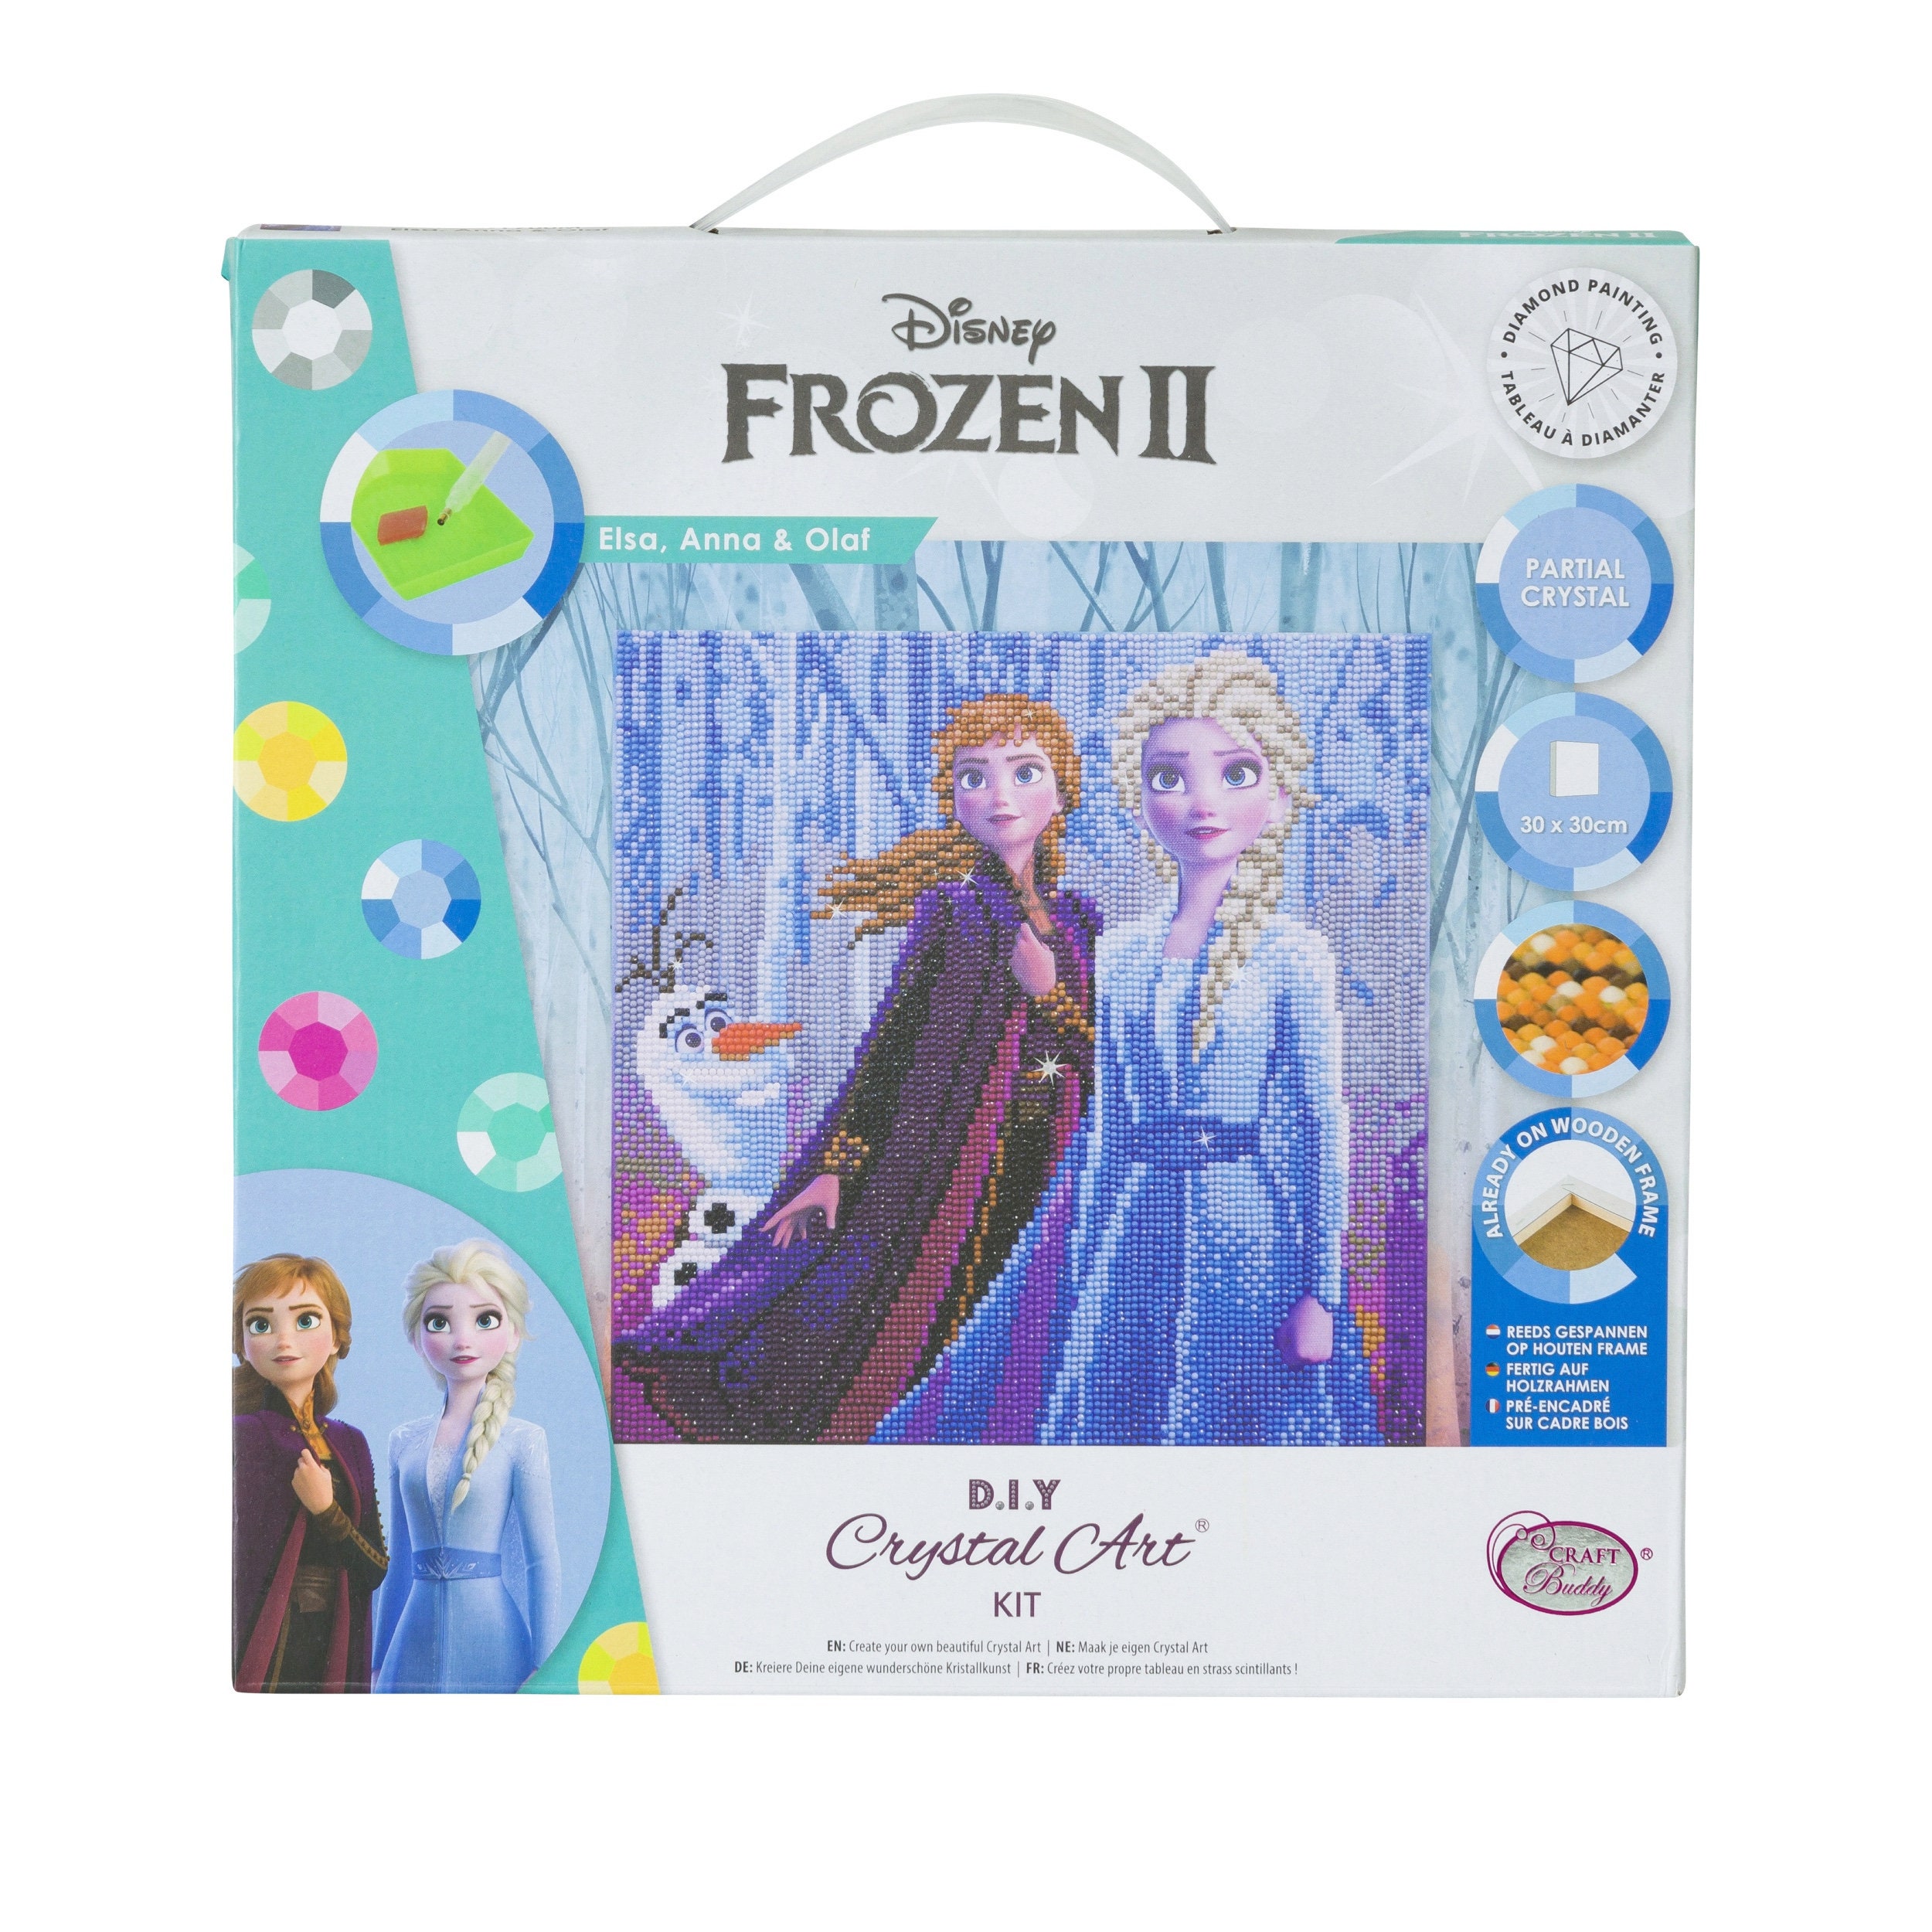 Disney Elsa Anna & Olaf Frozen Crystal Art DIY Picture Kit Ready to Hang  Once Complete, by Craft Buddy, 30 X 30 Cm Like Diamond Painting -   Sweden